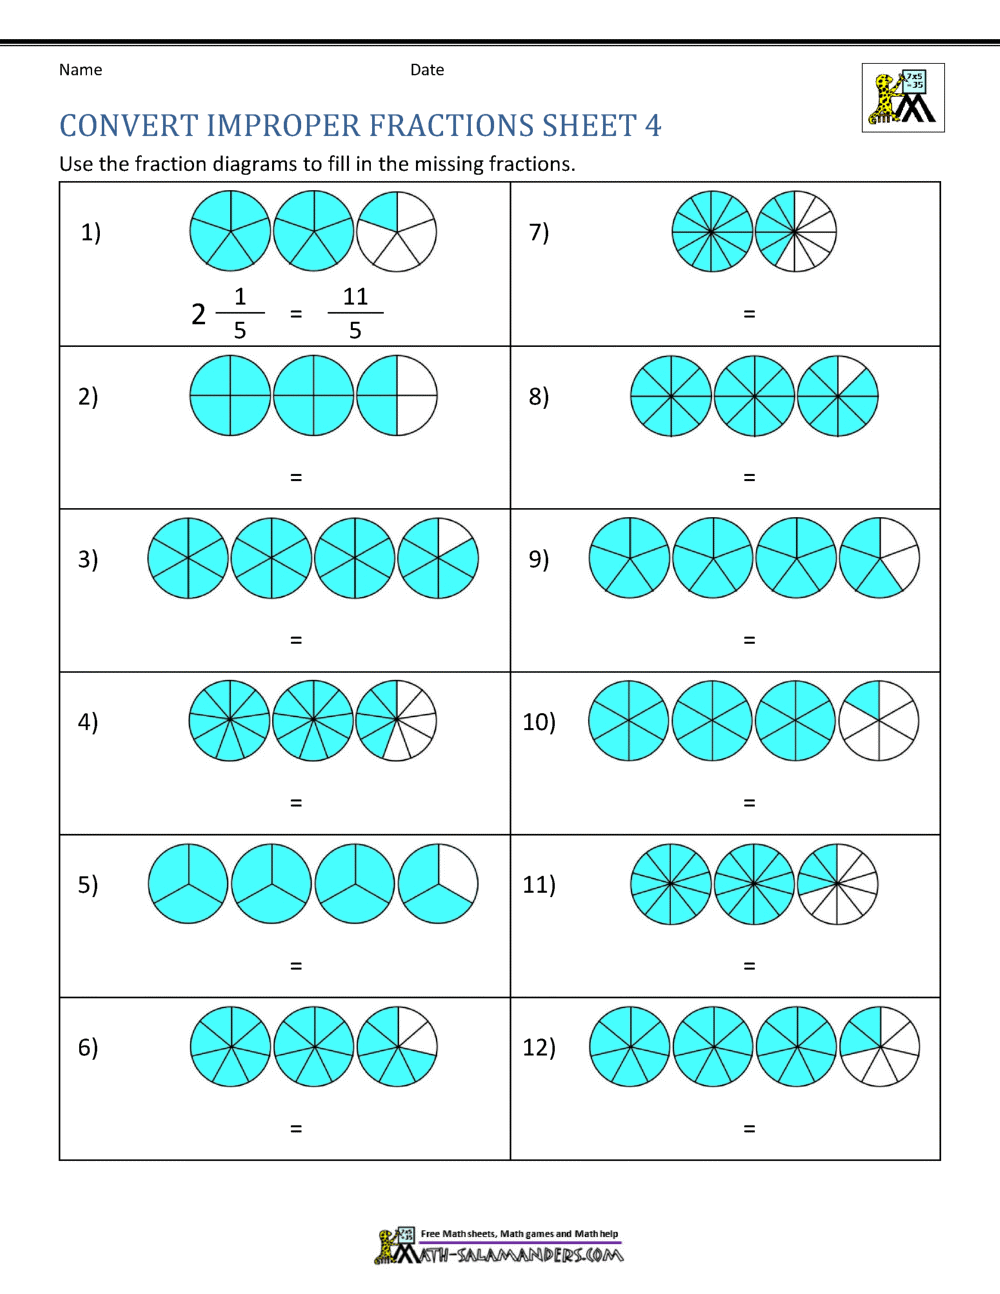 turning-improper-fractions-into-mixed-numbers-worksheet